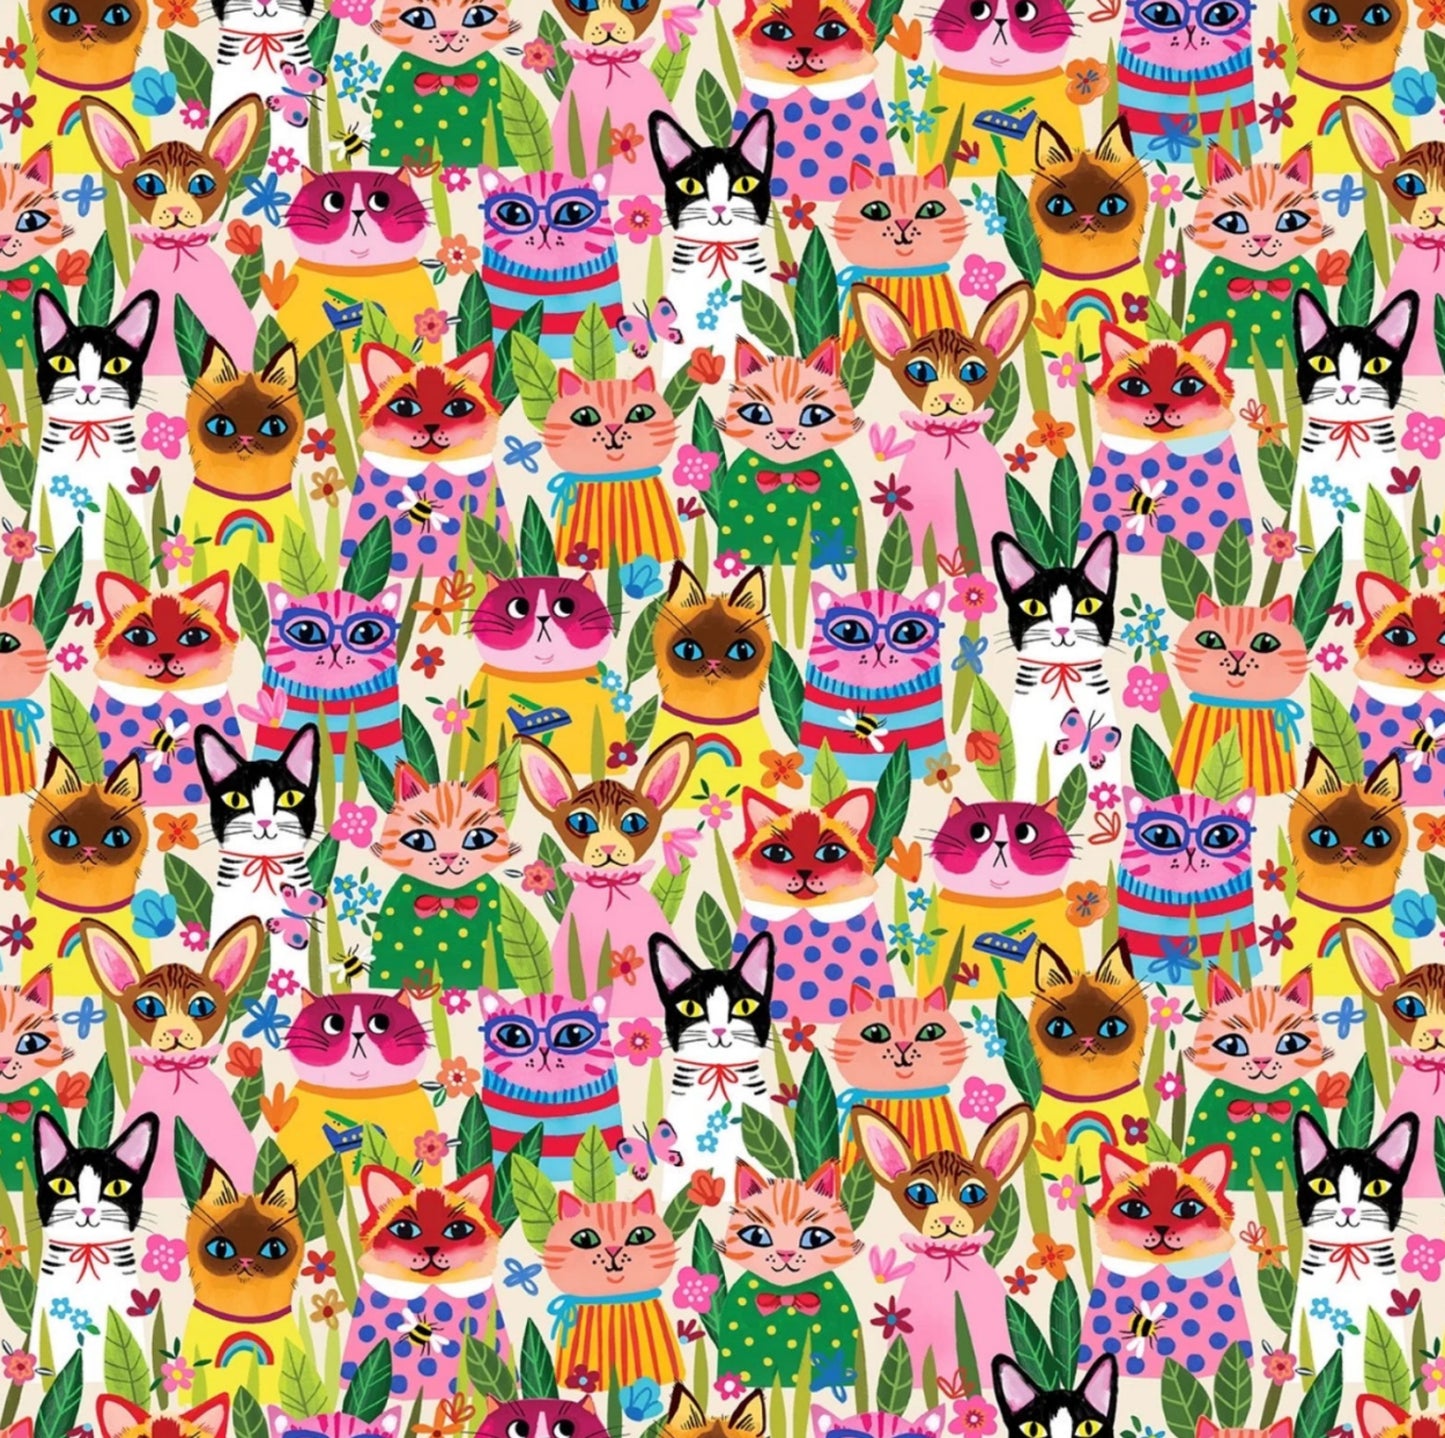 Funny Felines from the Puddy Cat Collection by emma Jane for Michael Miller Fabrics. A rainbow of cute cats on a light cream cotton fabric.